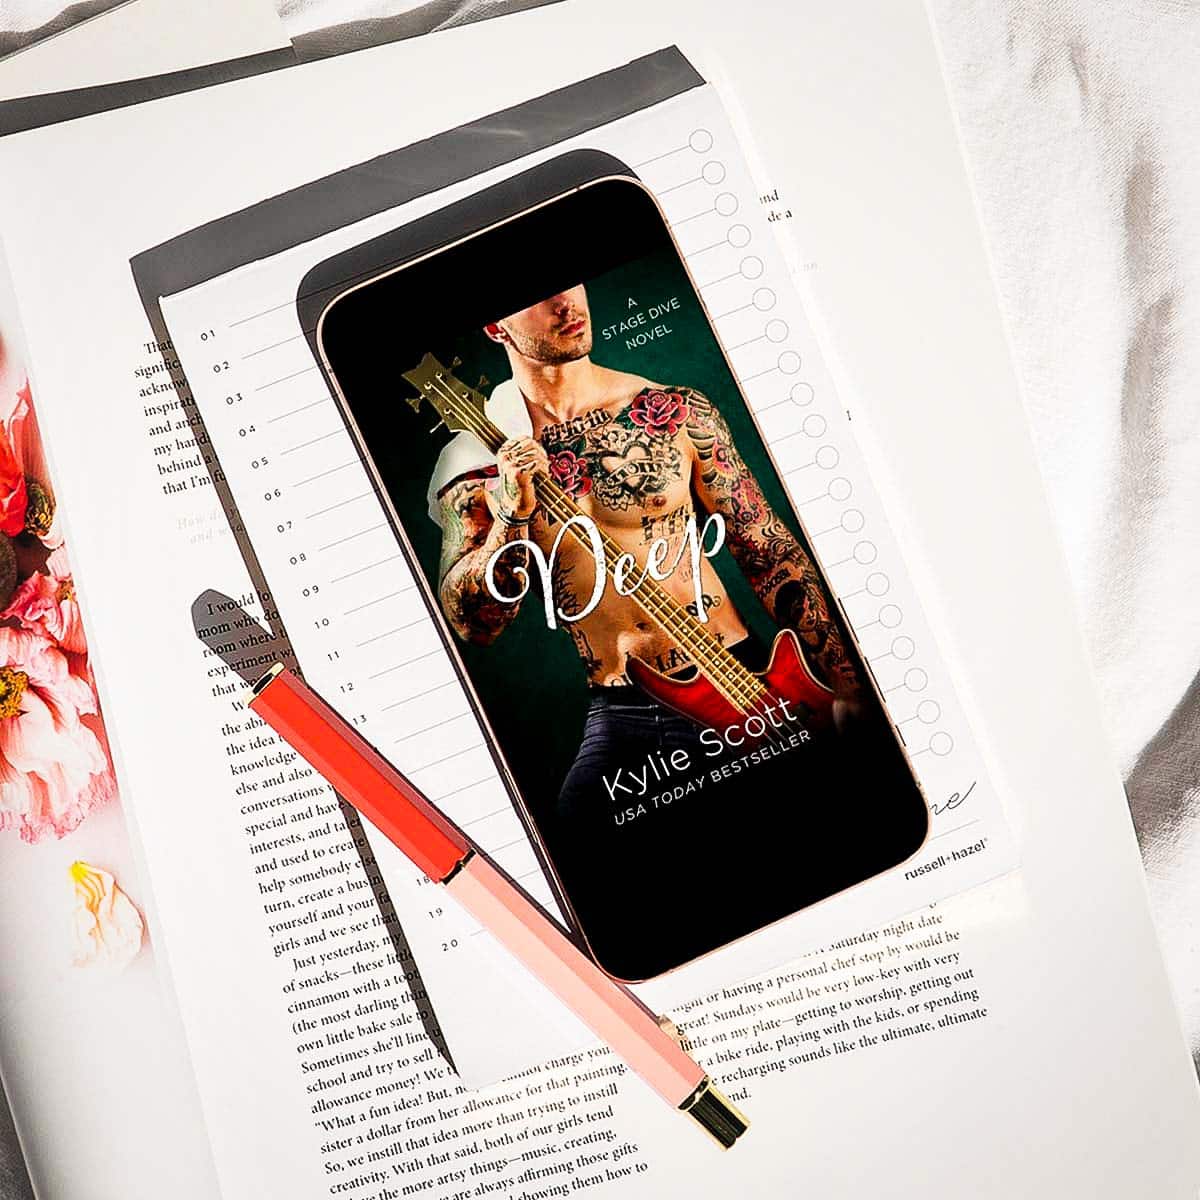 Deep by Kylie Scott is a rockstar romance with a surprise baby! This is the fourth book in the Stage Dive series and features the band's bassist, Ben, and his best friend's little sister, Lizzie.